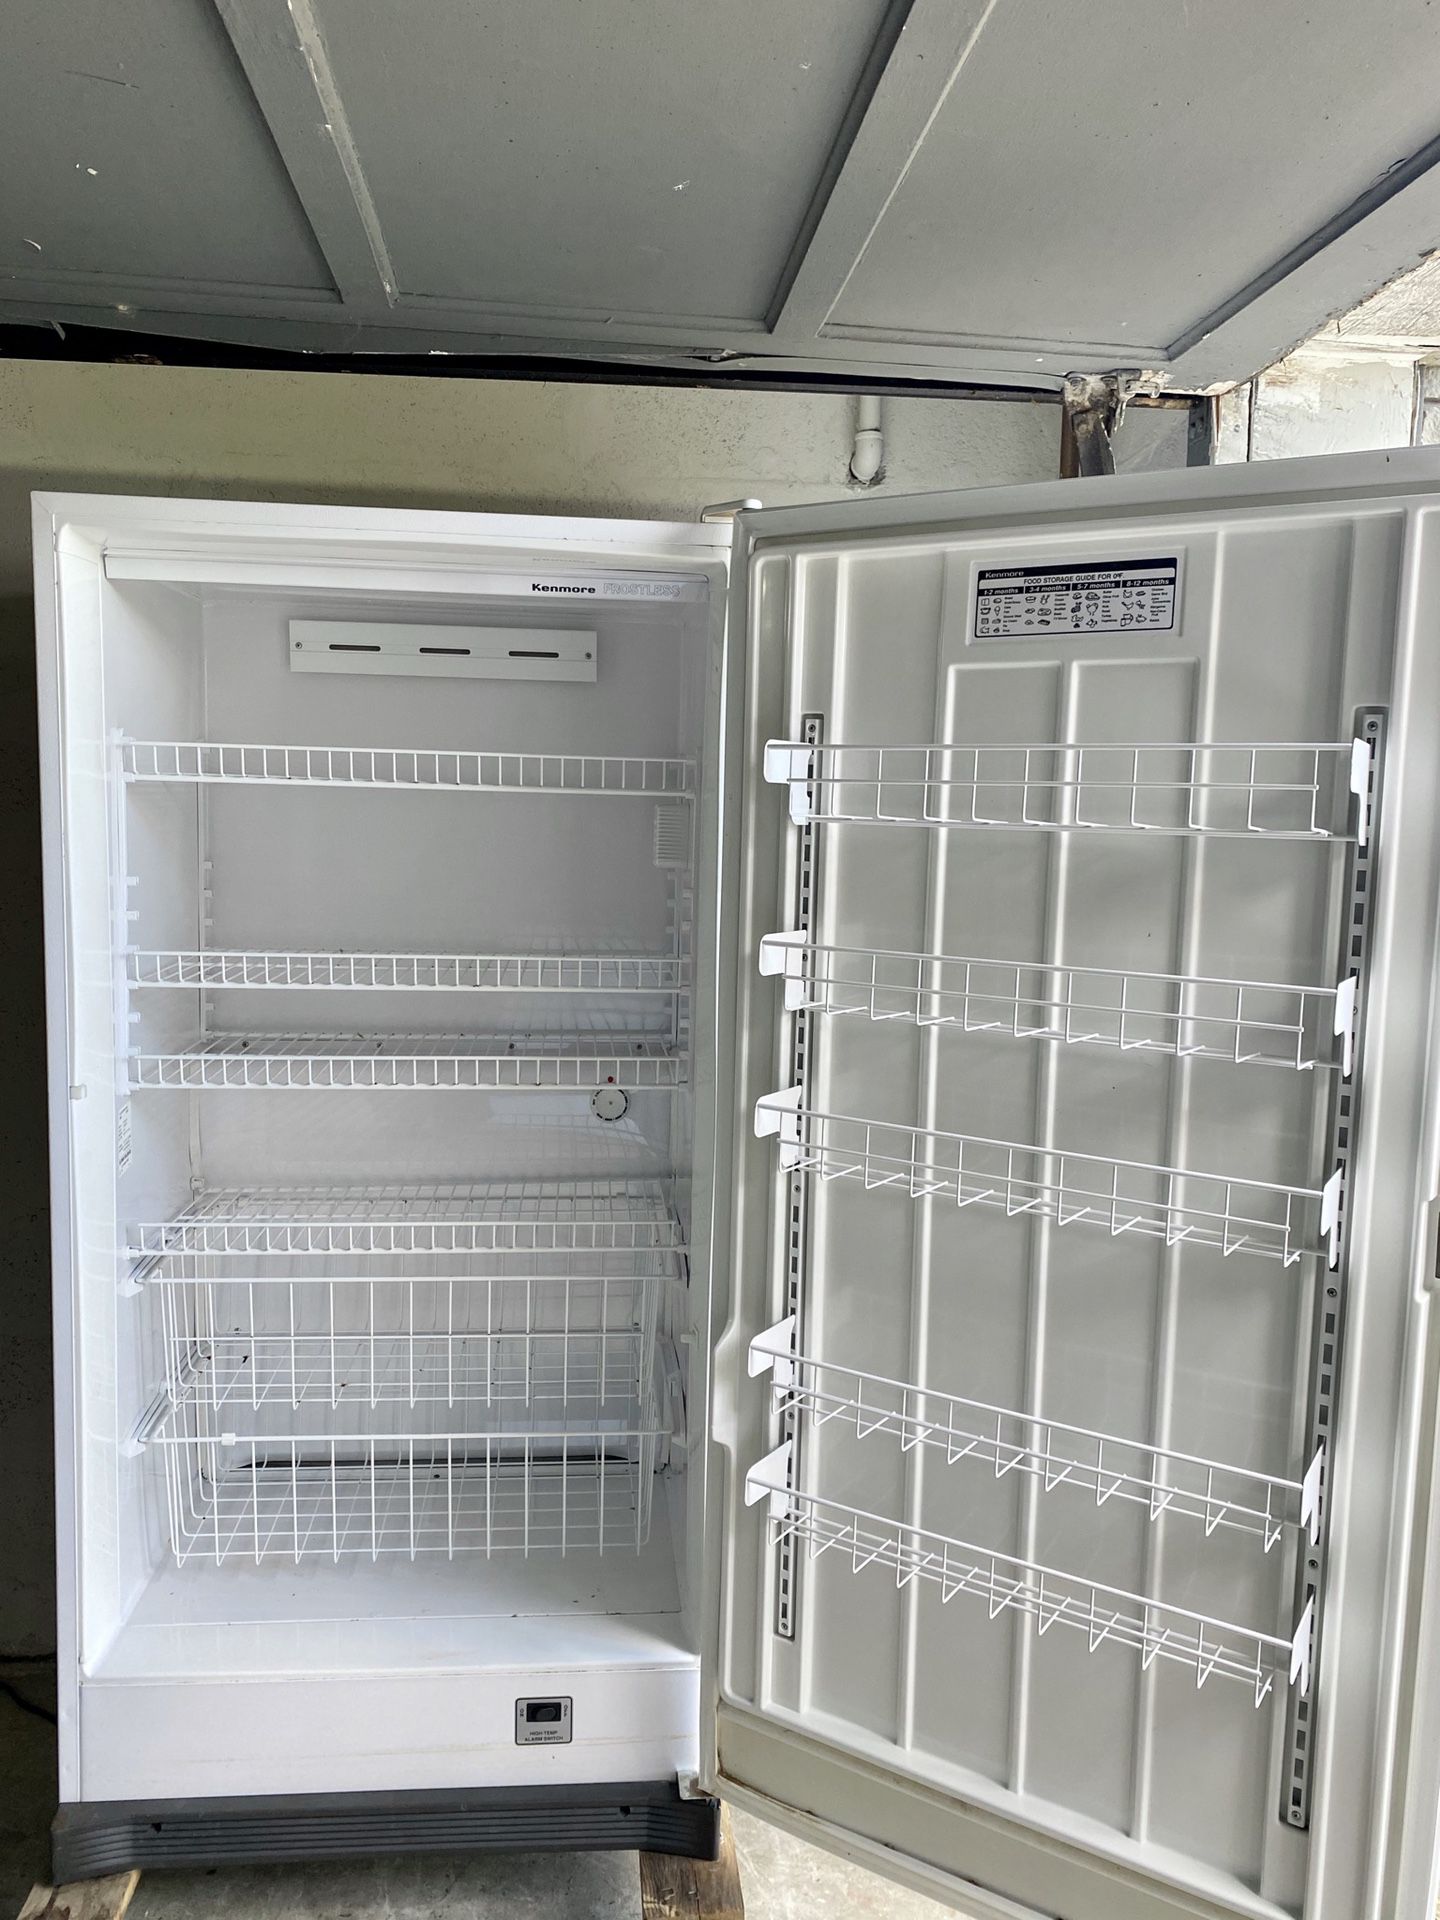 *Frost-Free* 20.0 Cubic Ft Kenmore Freezer